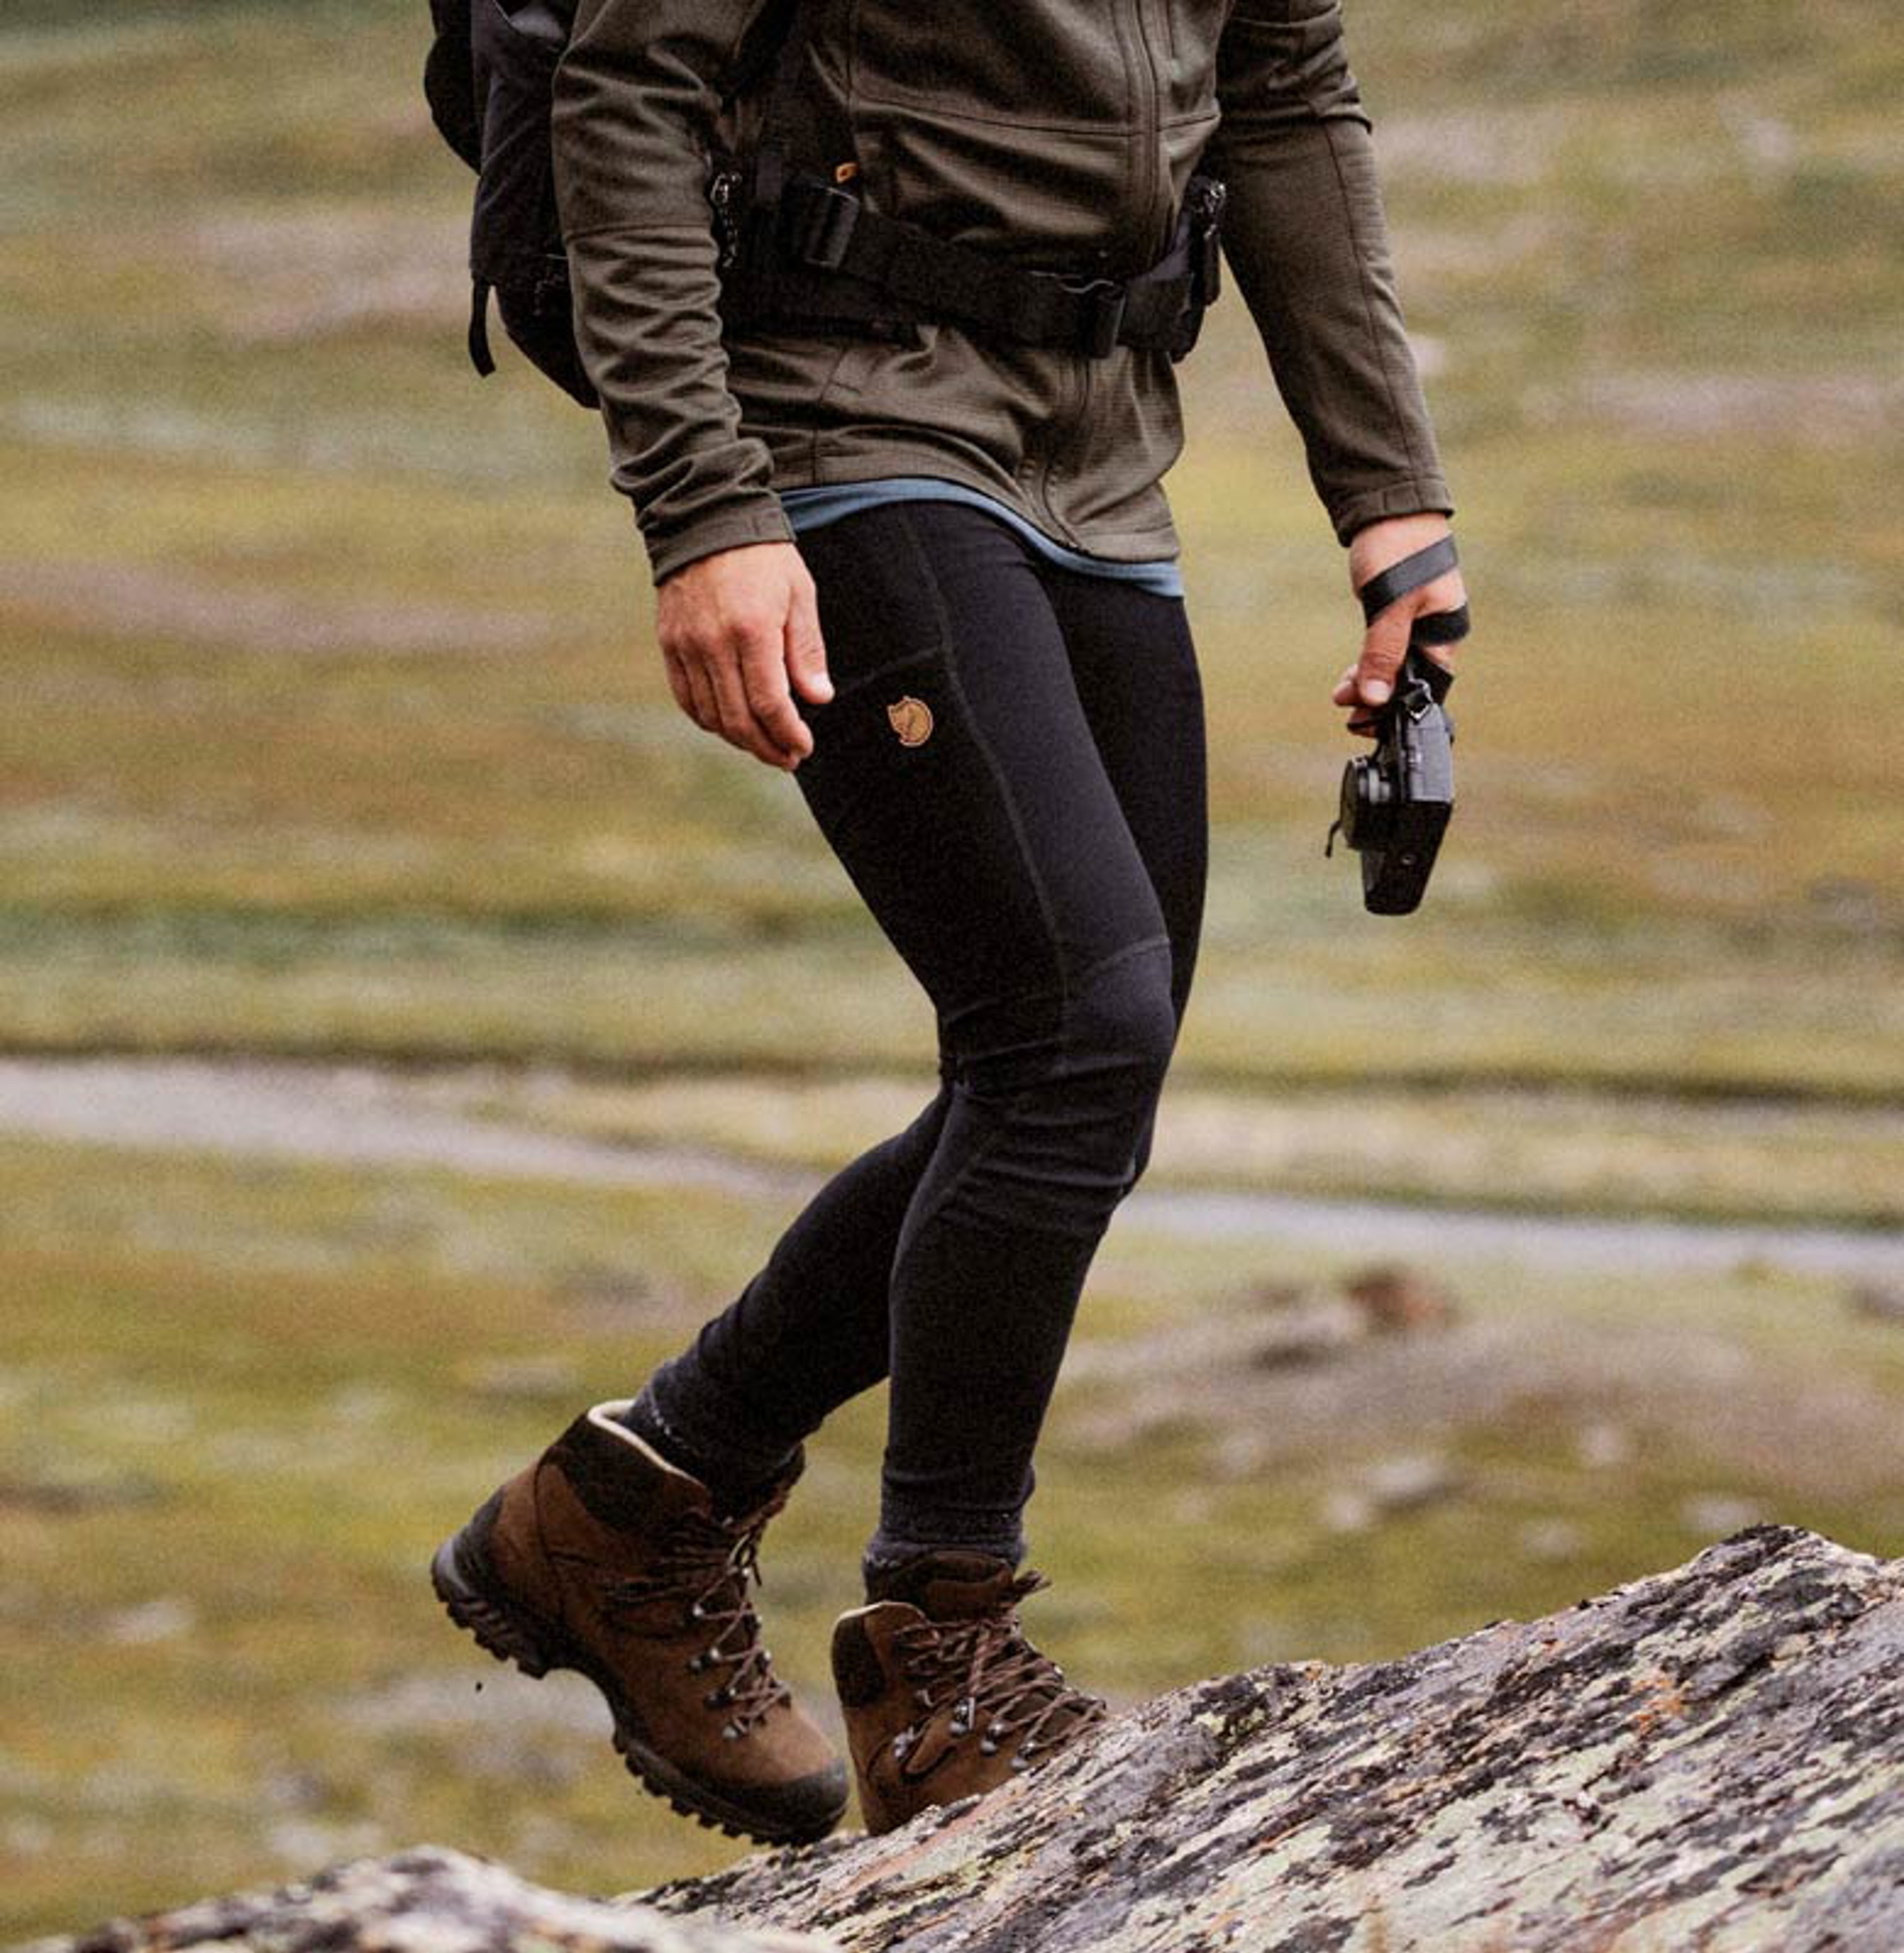 a person hiking with a camera in Fjallraven apparel